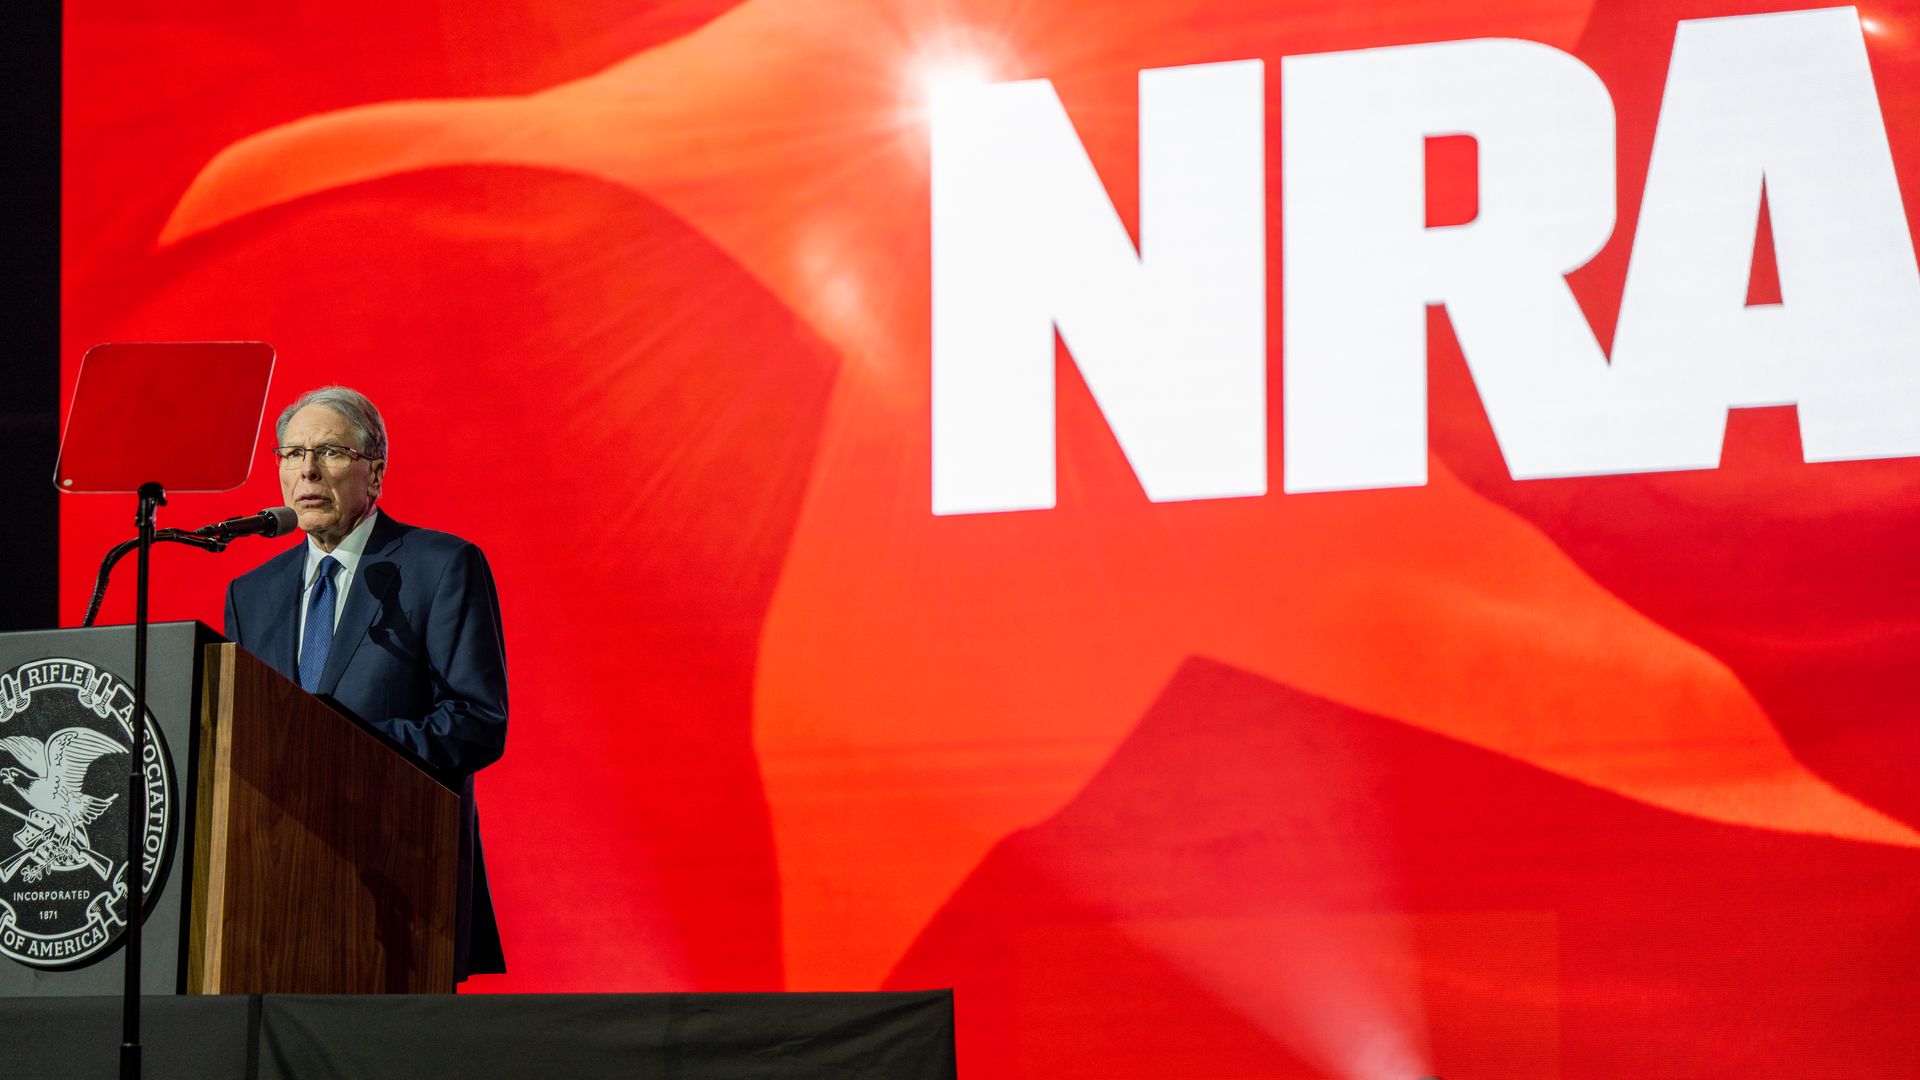 CEO and Executive vice president of the National Rifle Association (NRA) Wayne LaPierre prepares to speak.